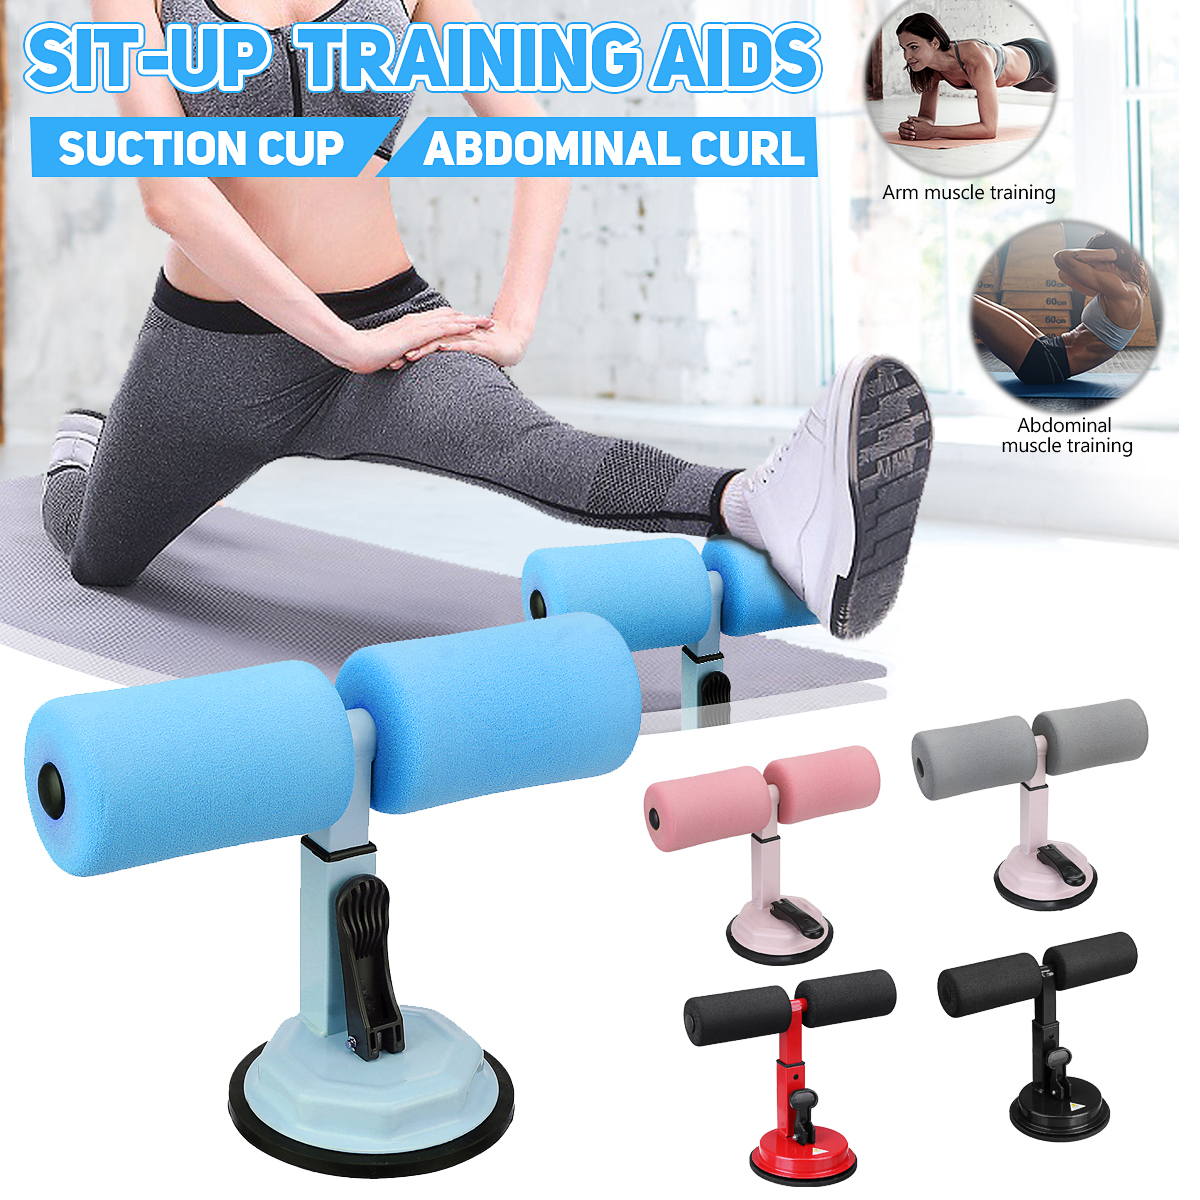 Suction-Sit-Up-Stand-Bars-Portable-Core-Strength-Muscle-Training-Safety-Body-Building-Fitness-Equipm-1810083-1